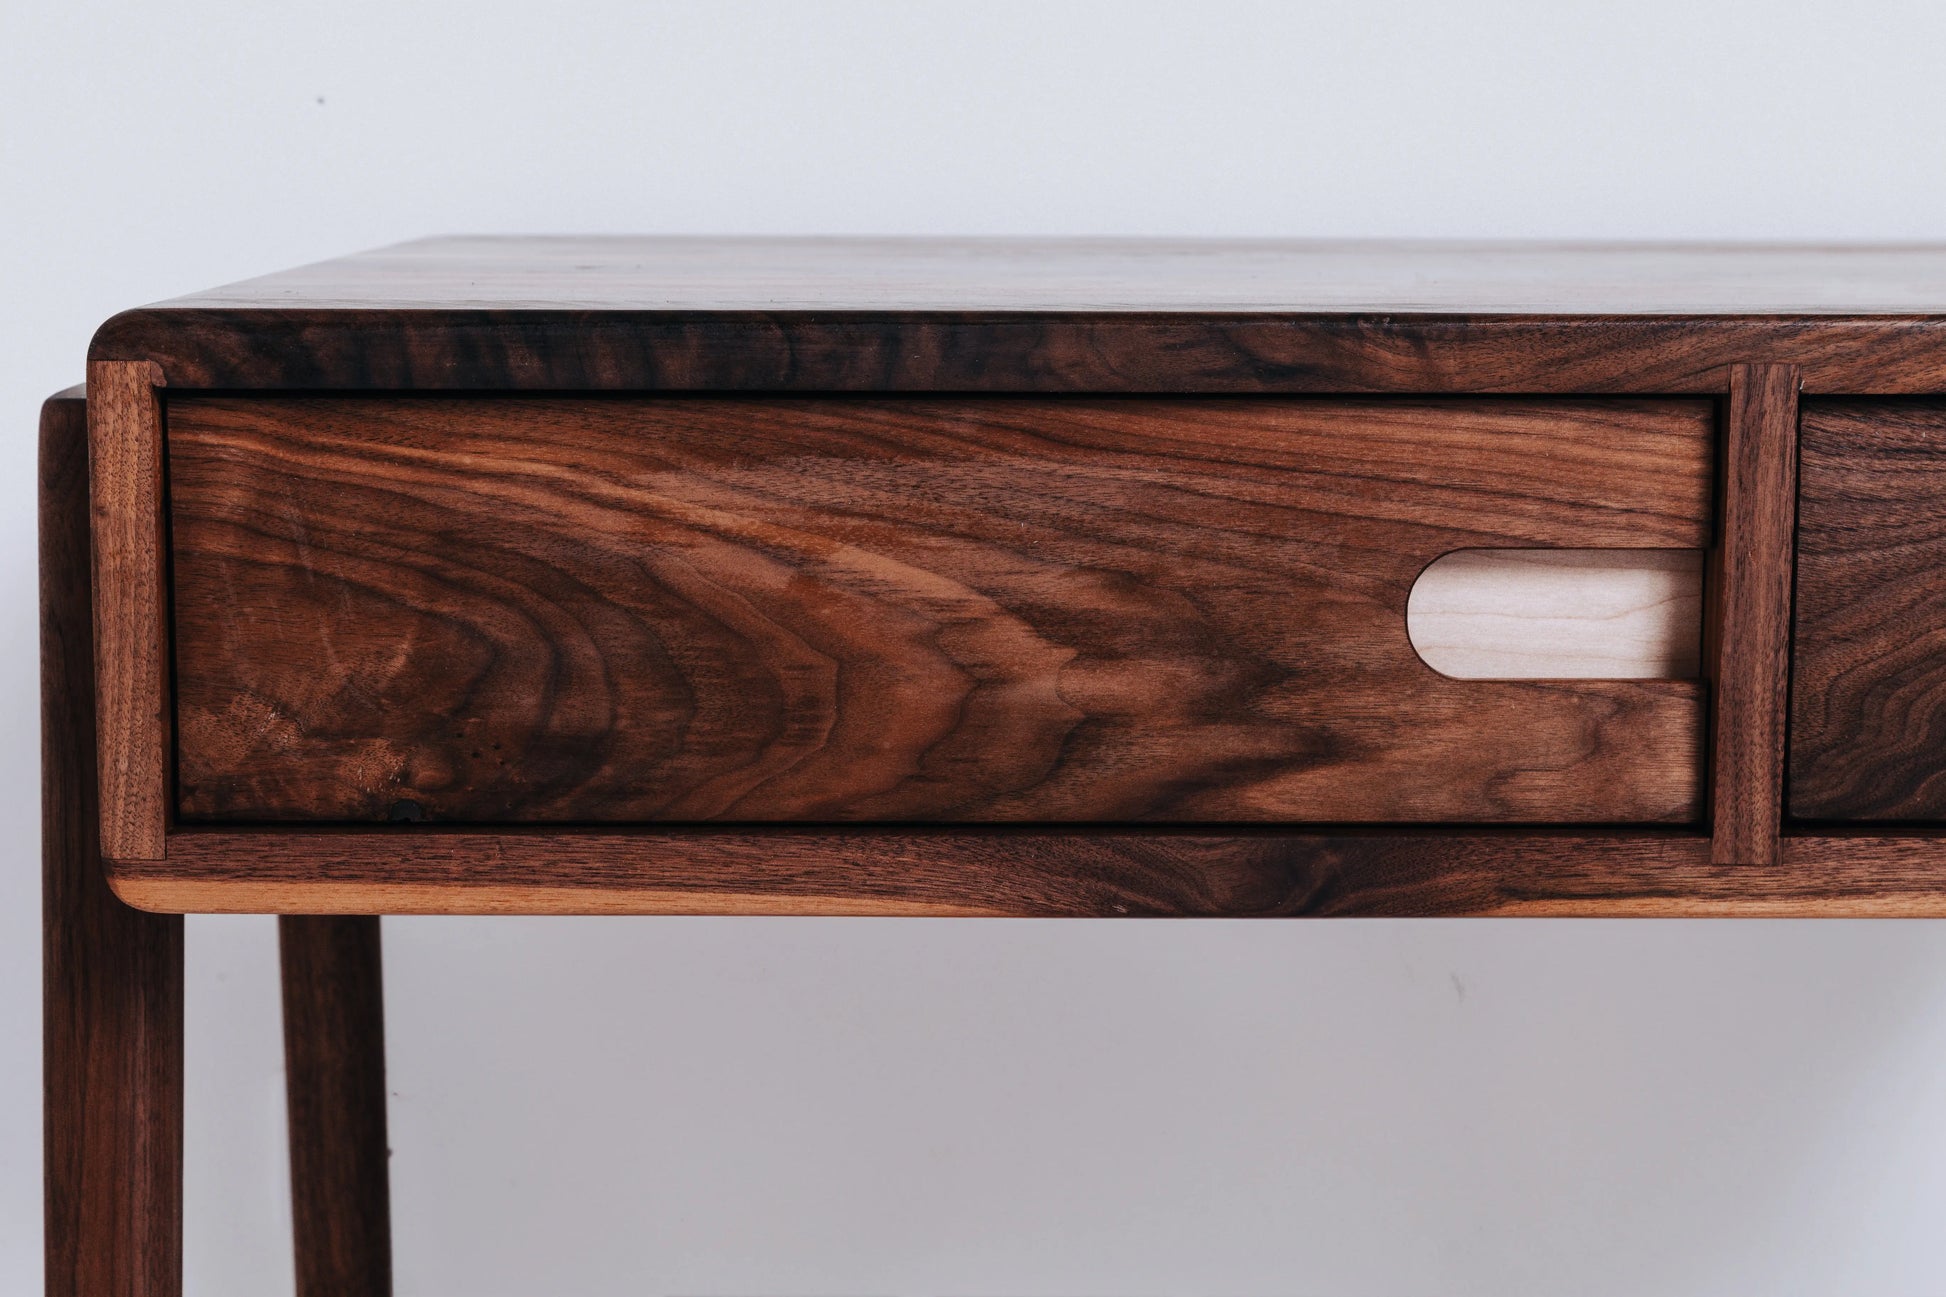 Close-up of Fjord's rock maple pulls on black walnut drawers, showcasing the coffee table's fine craftsmanship